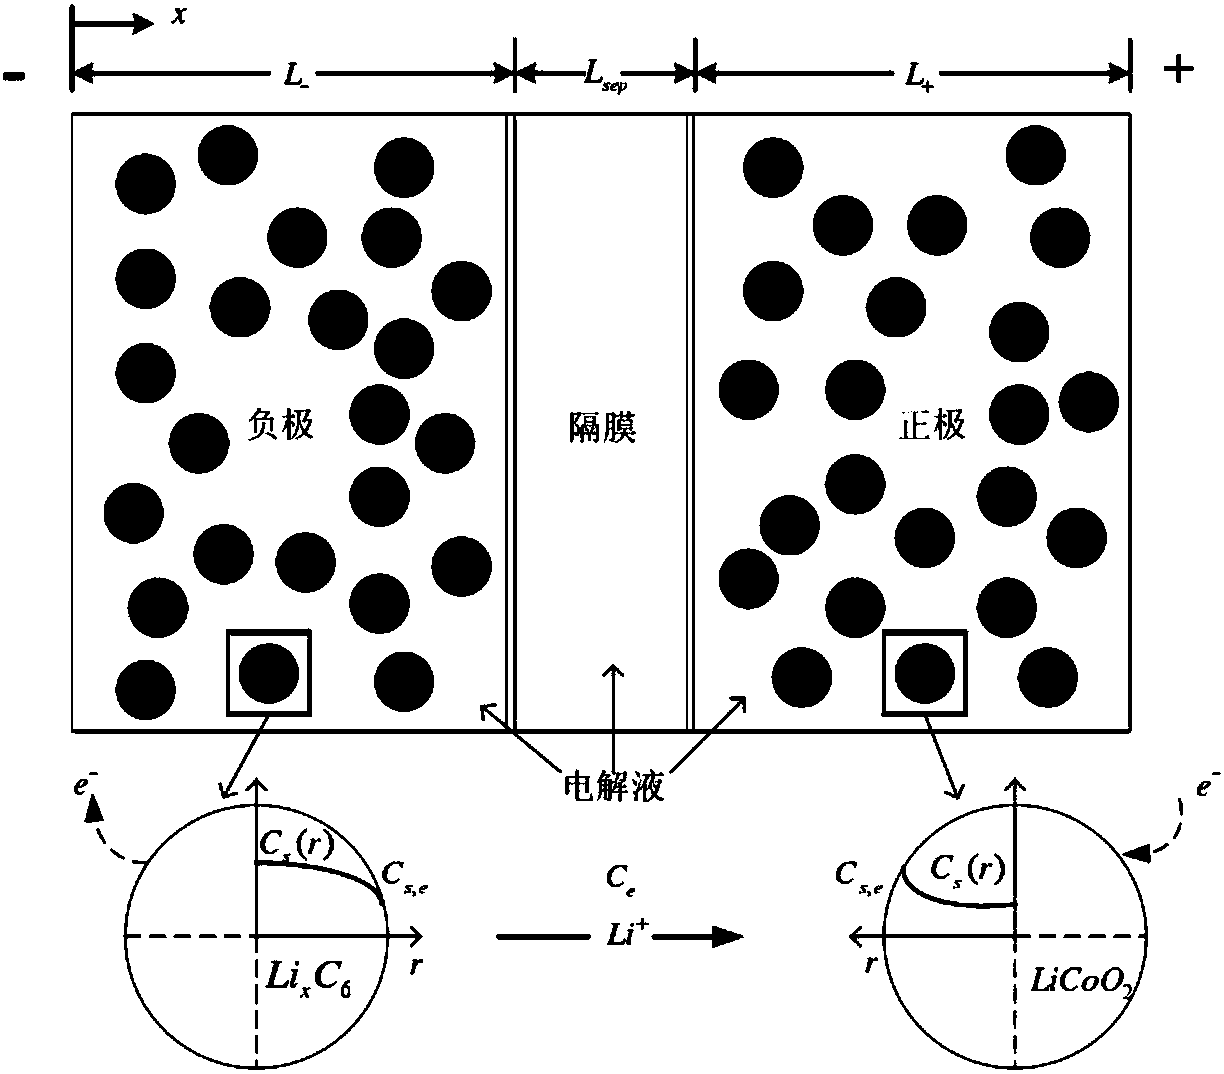 Joint estimation method of state of charge and state of health of power battery system based on electrochemical model